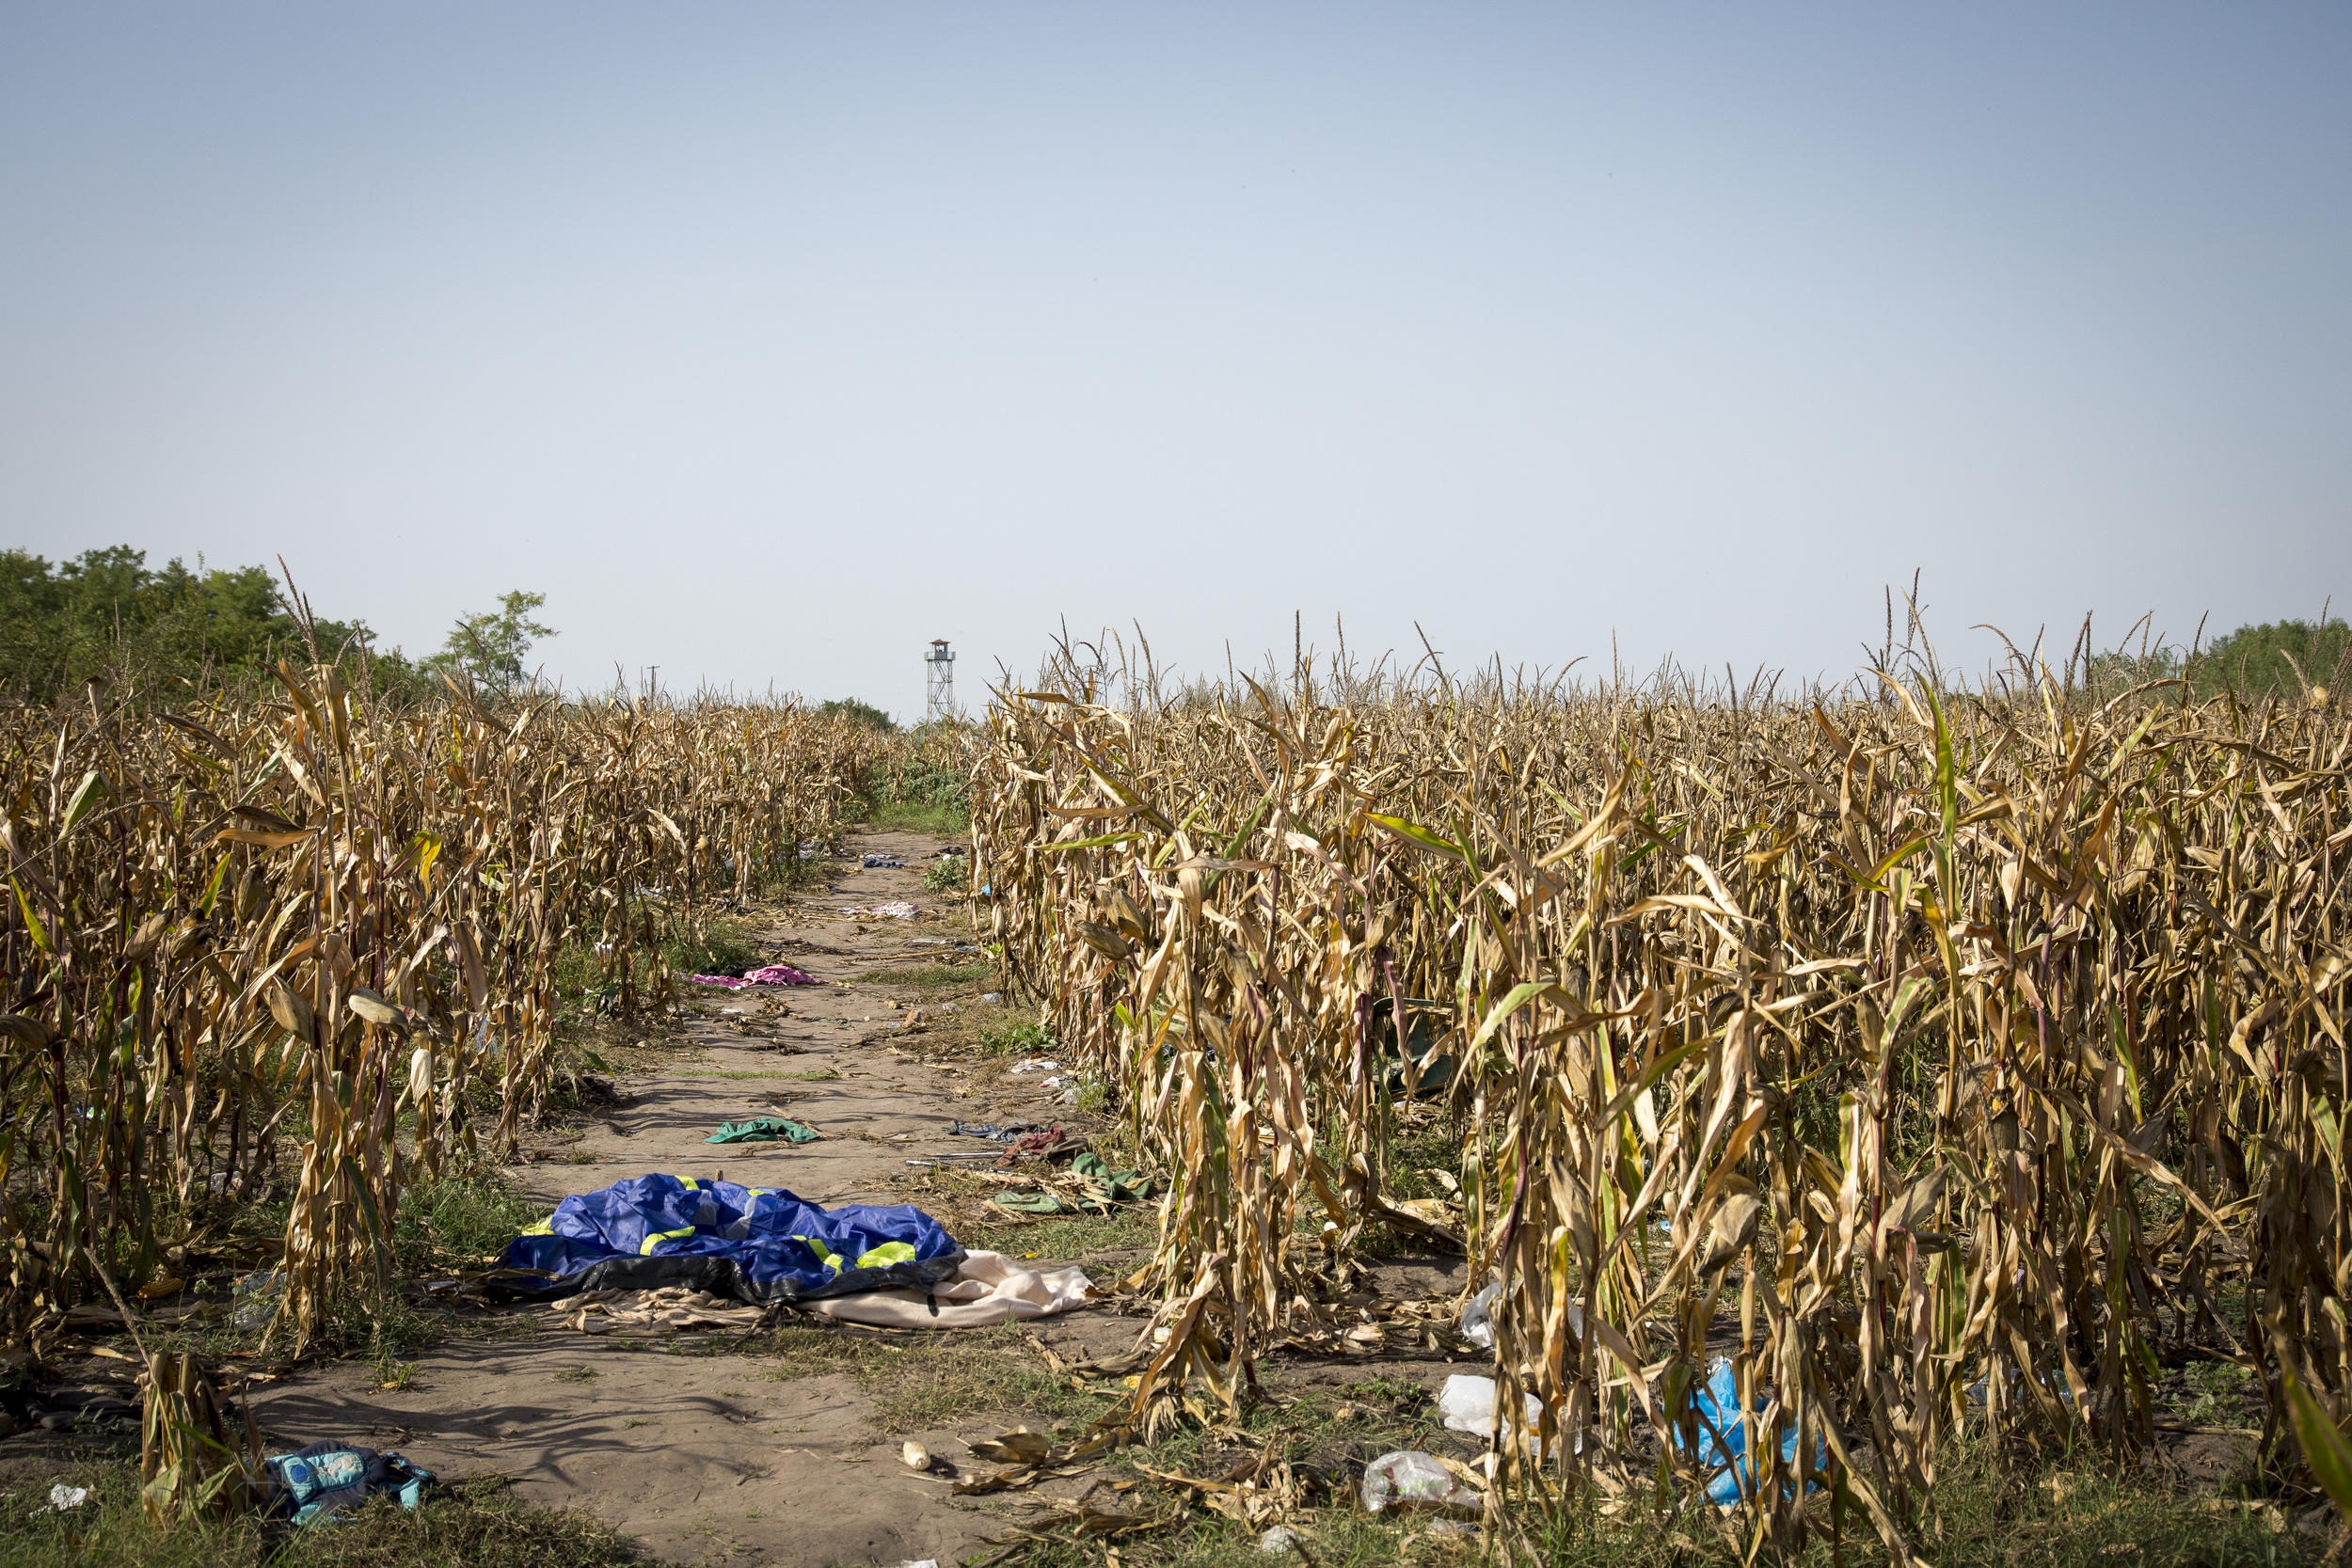   Through this cornfield many fled from the police. Now it is just a tent, trash and shoe prints left.  